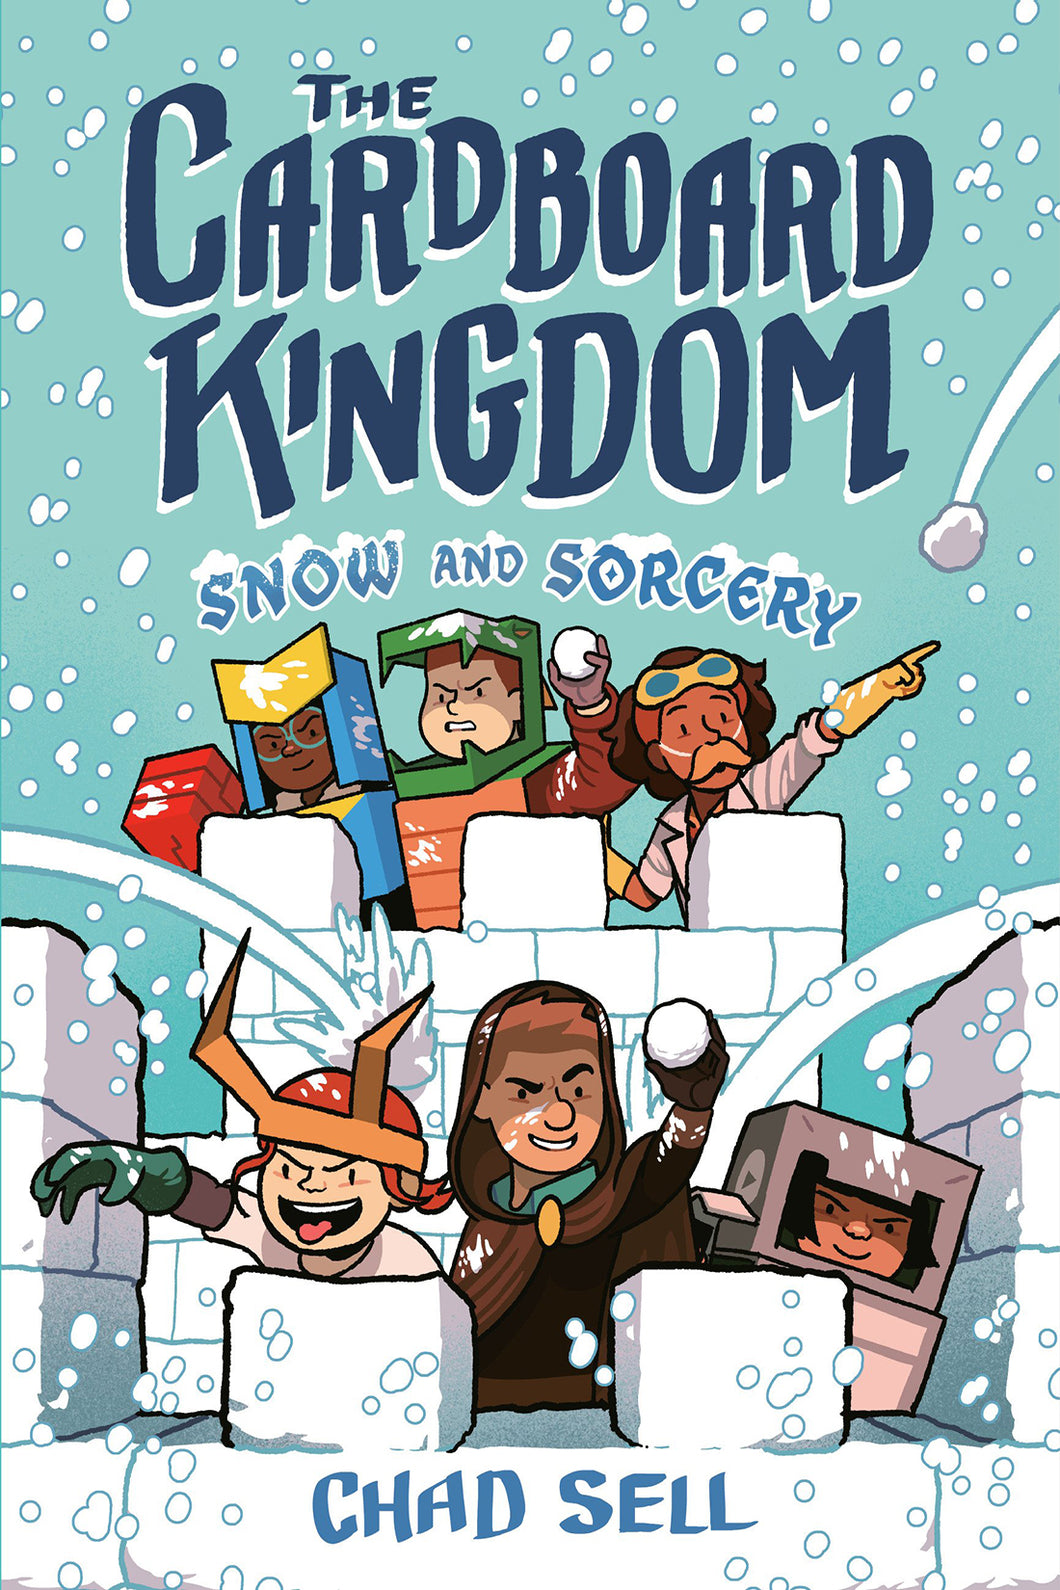 The Cardboard Kingdom #3: Snow and Sorcery: (A Graphic Novel) by Chad Sell / Hardcover or Paperback - NEW BOOK